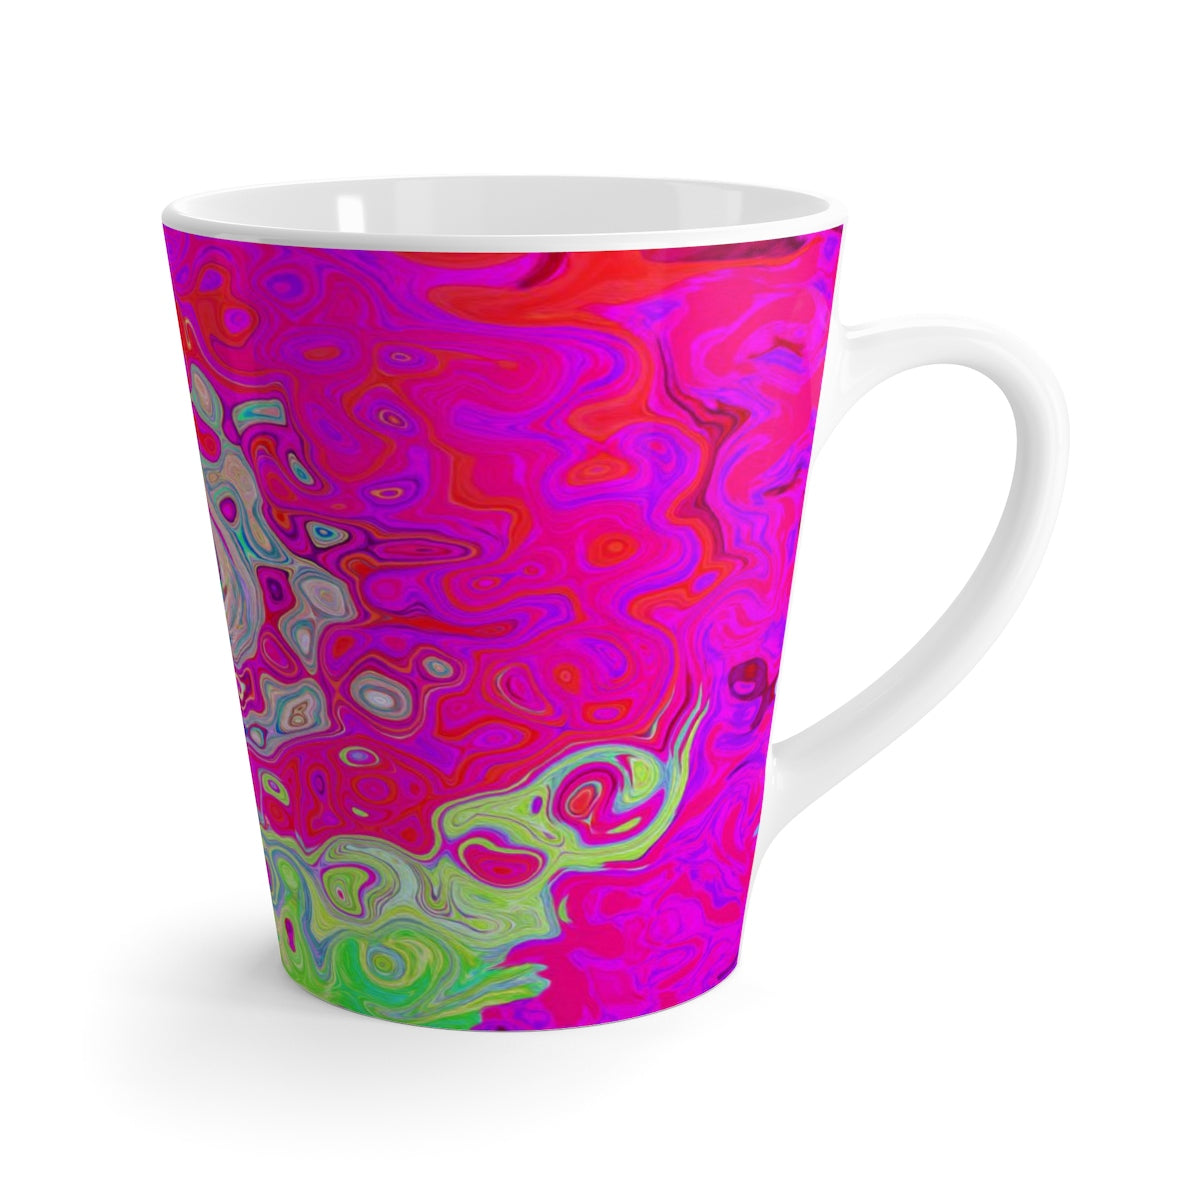 Latte mug, Groovy Abstract Teal Blue and Red Swirl